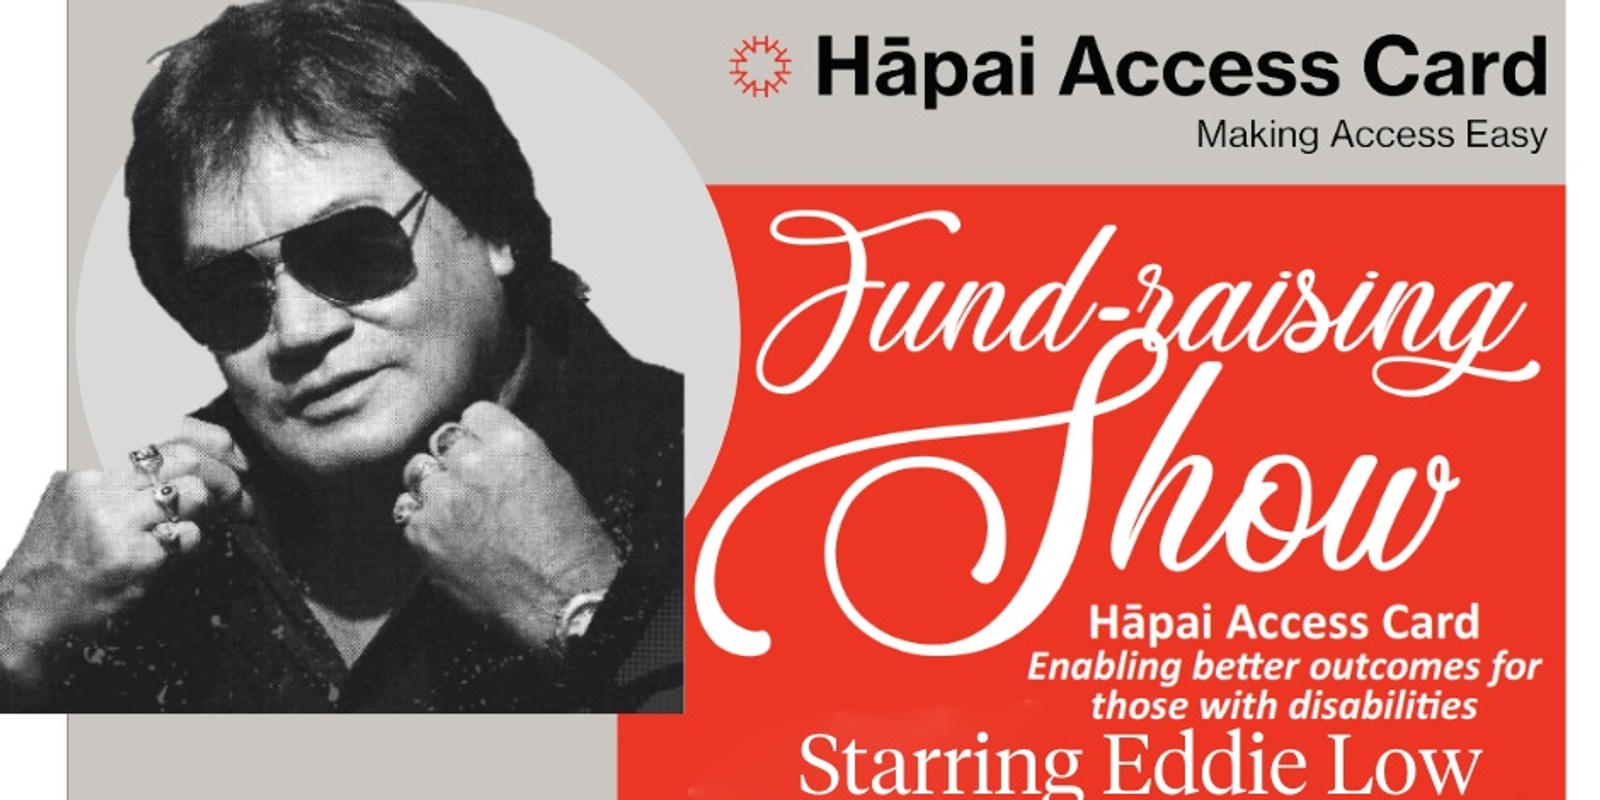 Banner image for Hapai Access Card Fundraising Show starring Eddie Low